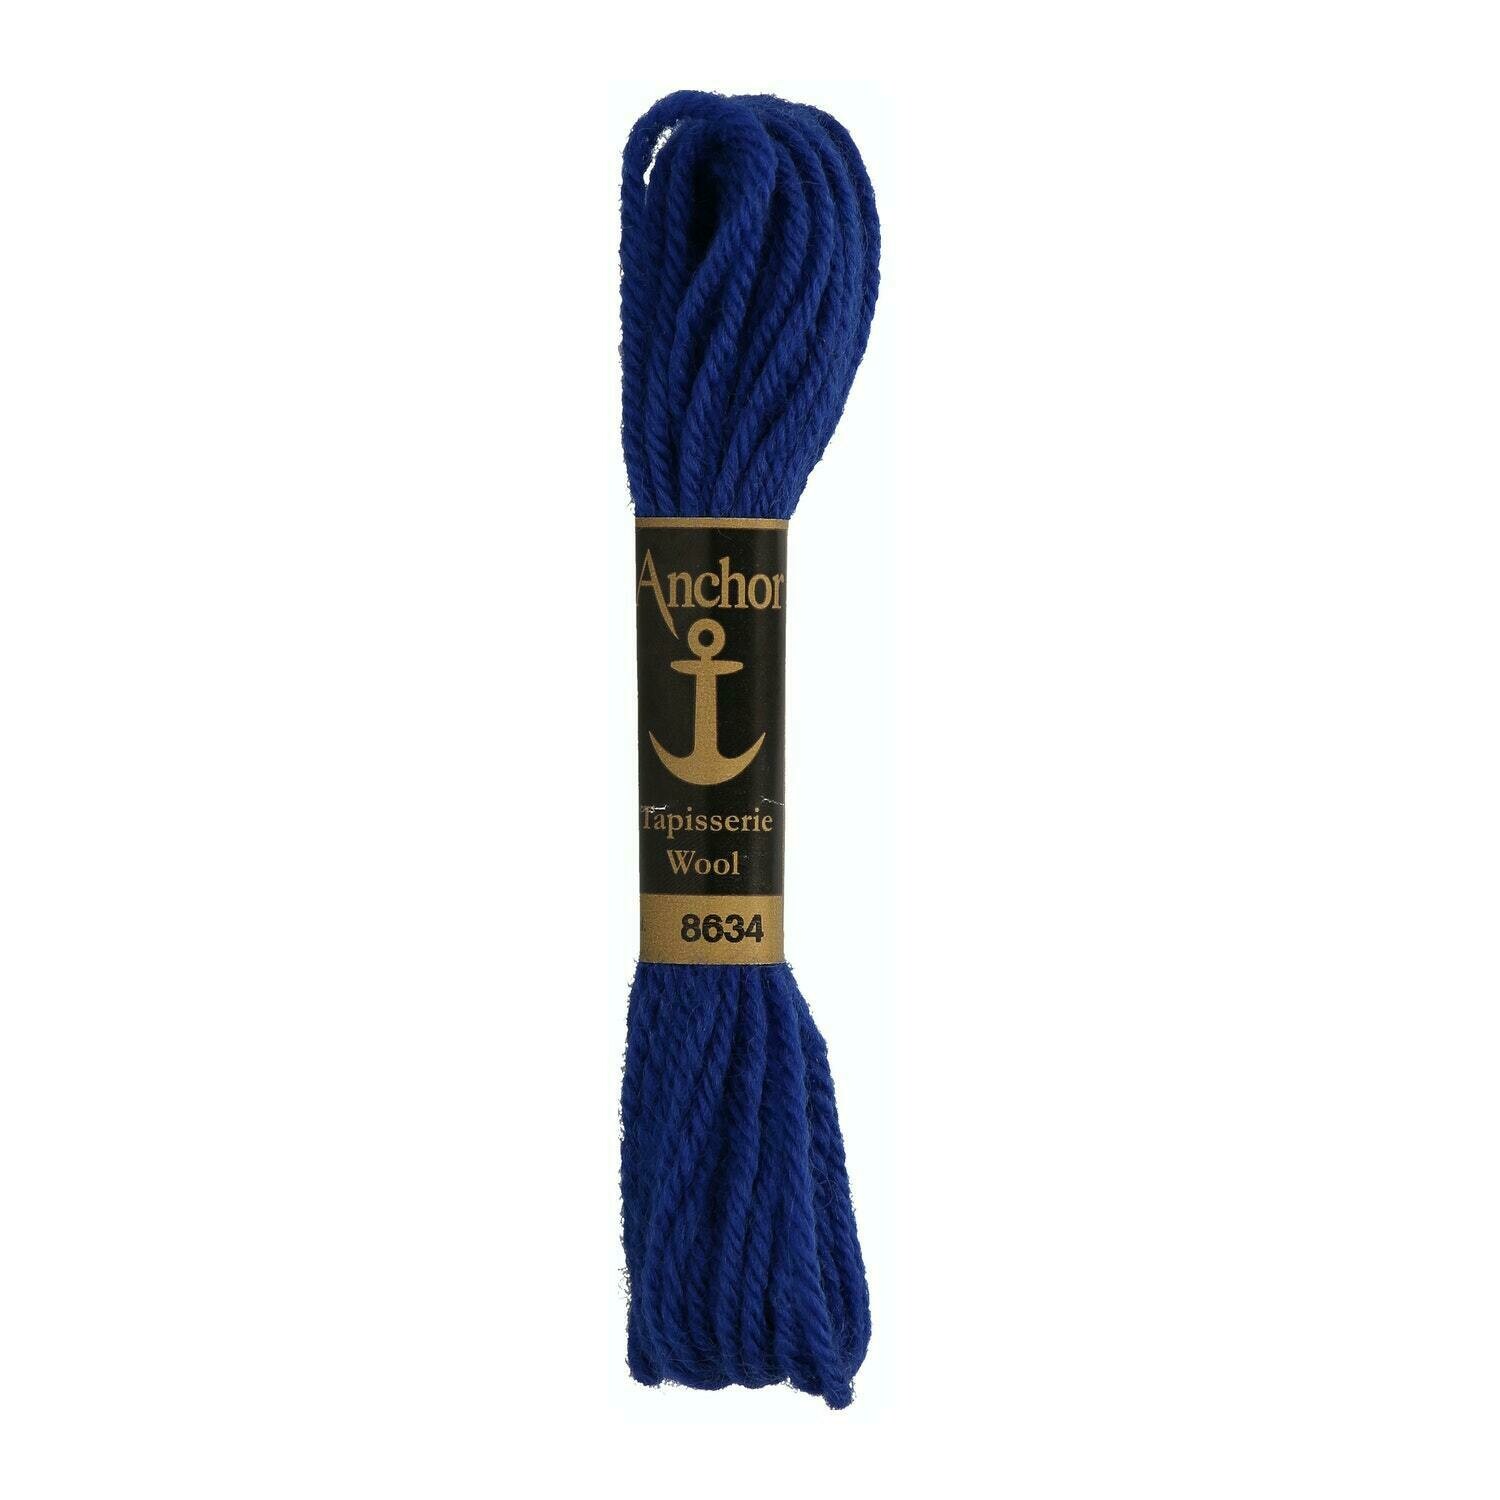 Anchor Tapisserie Wool #08634